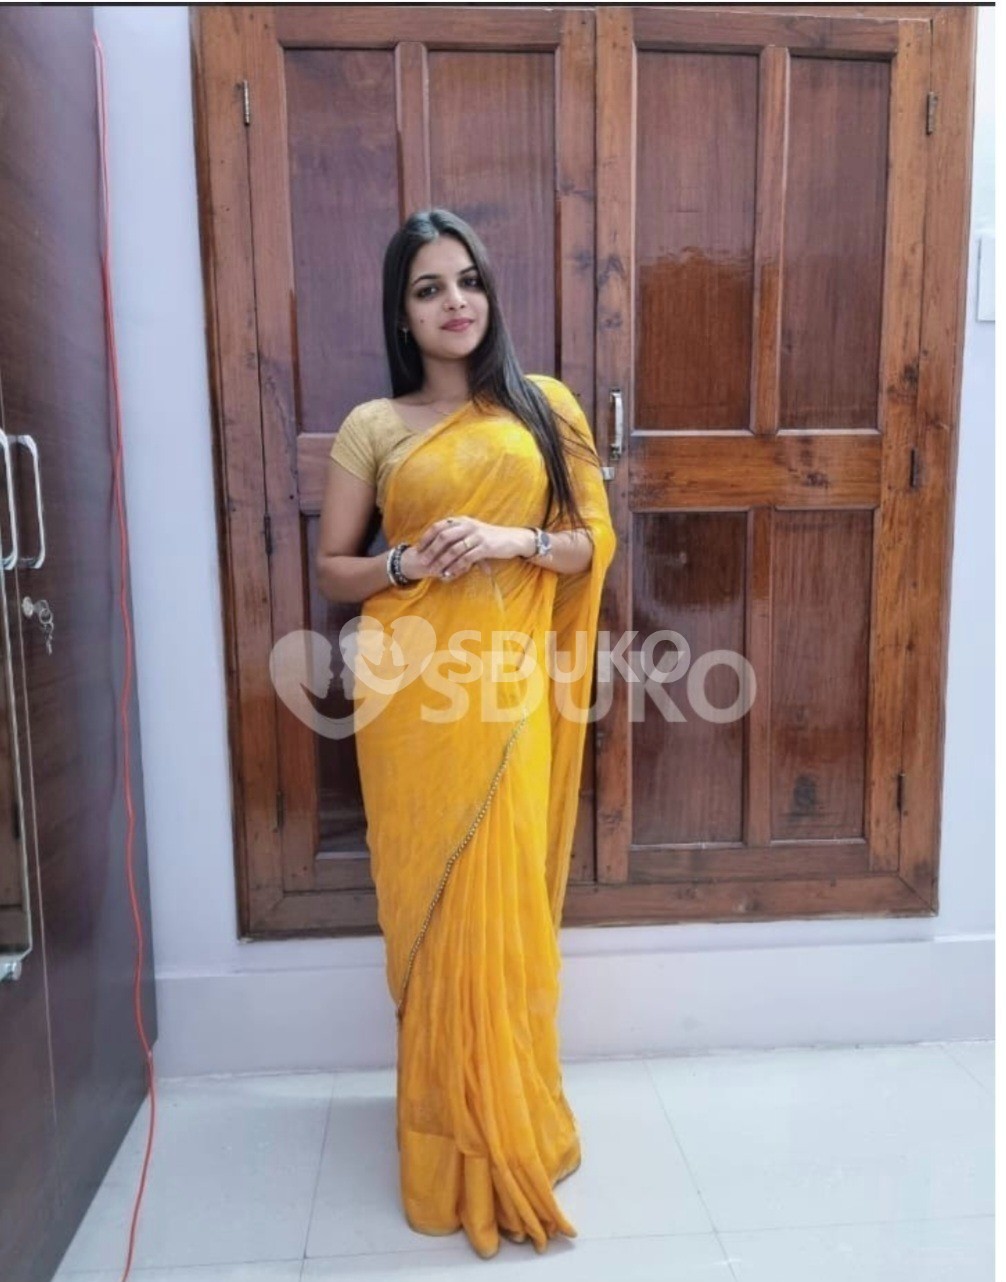 SECUNDERABAD LOW RATE SUSMITA ESCORT FULL HARD FUCK WITH NAUGHTY IF YOU WANT TO FUCK MY PUSSY WITH BIG BOOBS GIRLS- CALL